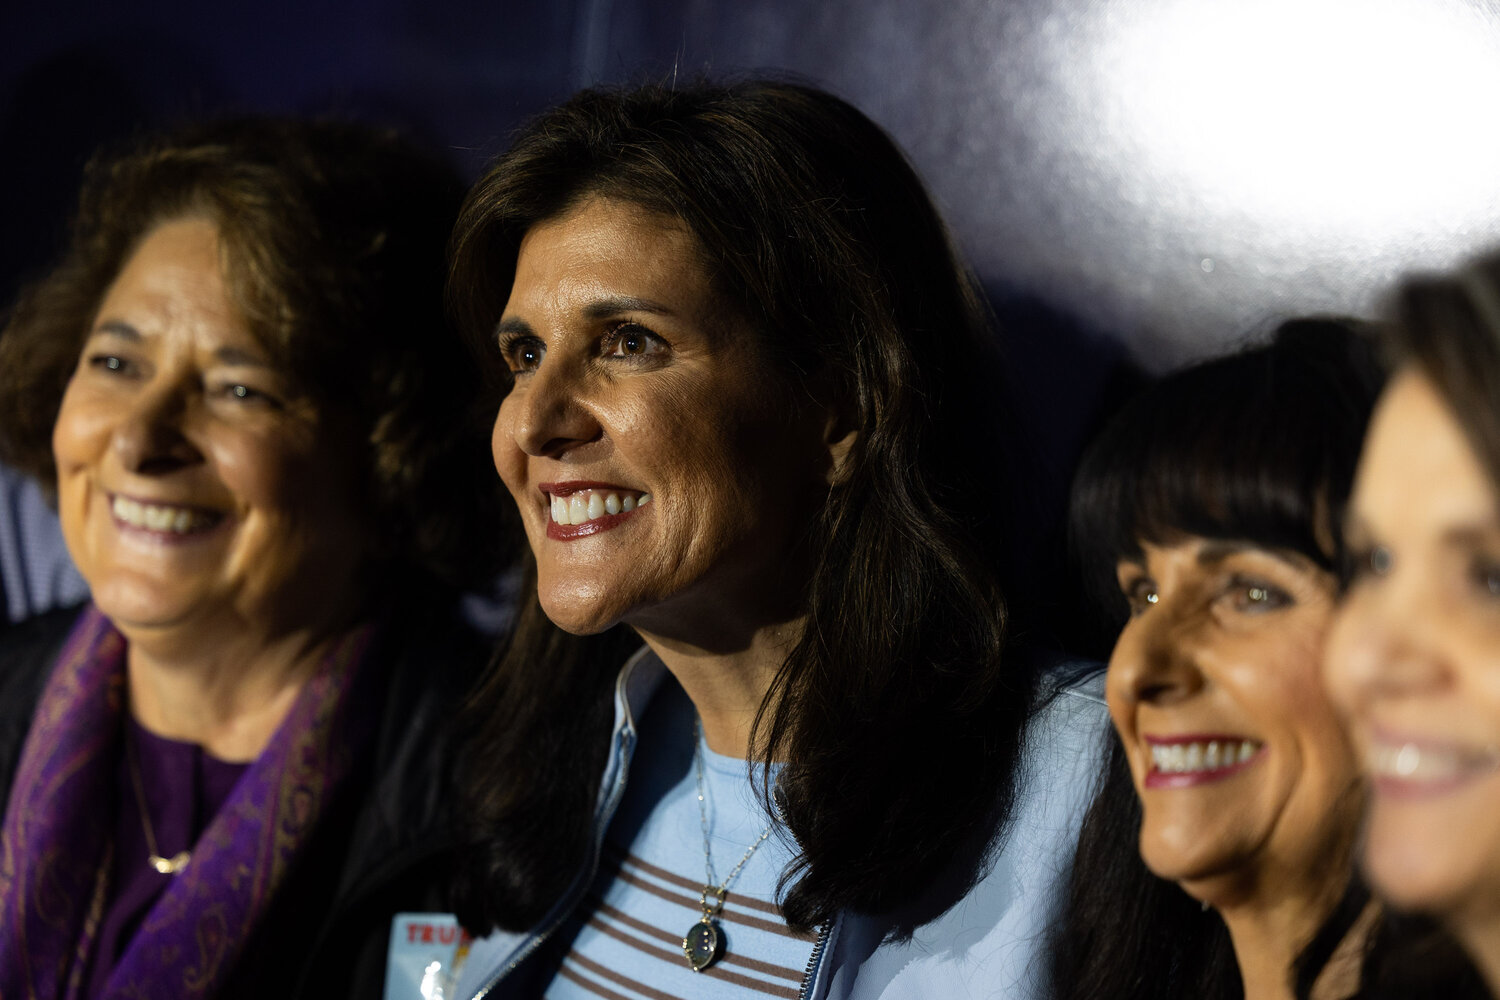 Nikki Haley brought her presidential campaign bus tour to Gilbert Feb. 10 to make her pitch to Lexington County voters.